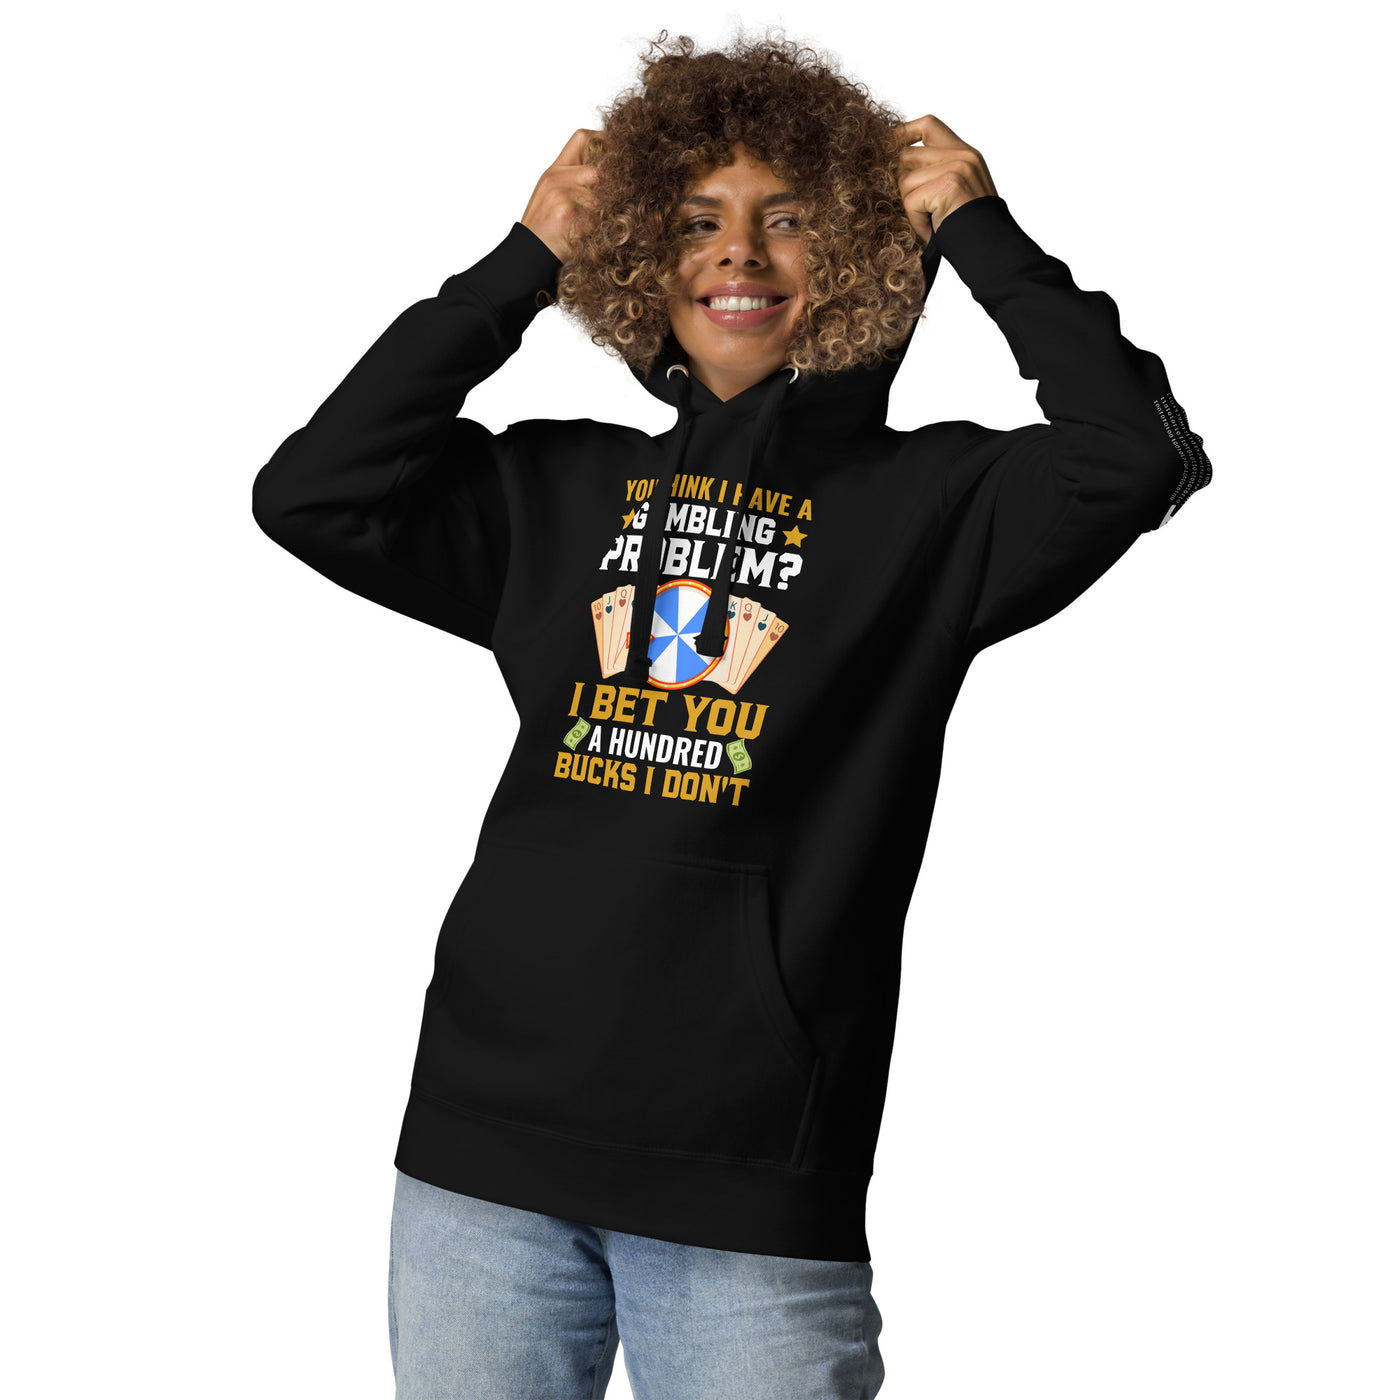 You Think I Have a Gambling Problem? I Bet you a Hundred Bucks I Don't - Unisex Hoodie